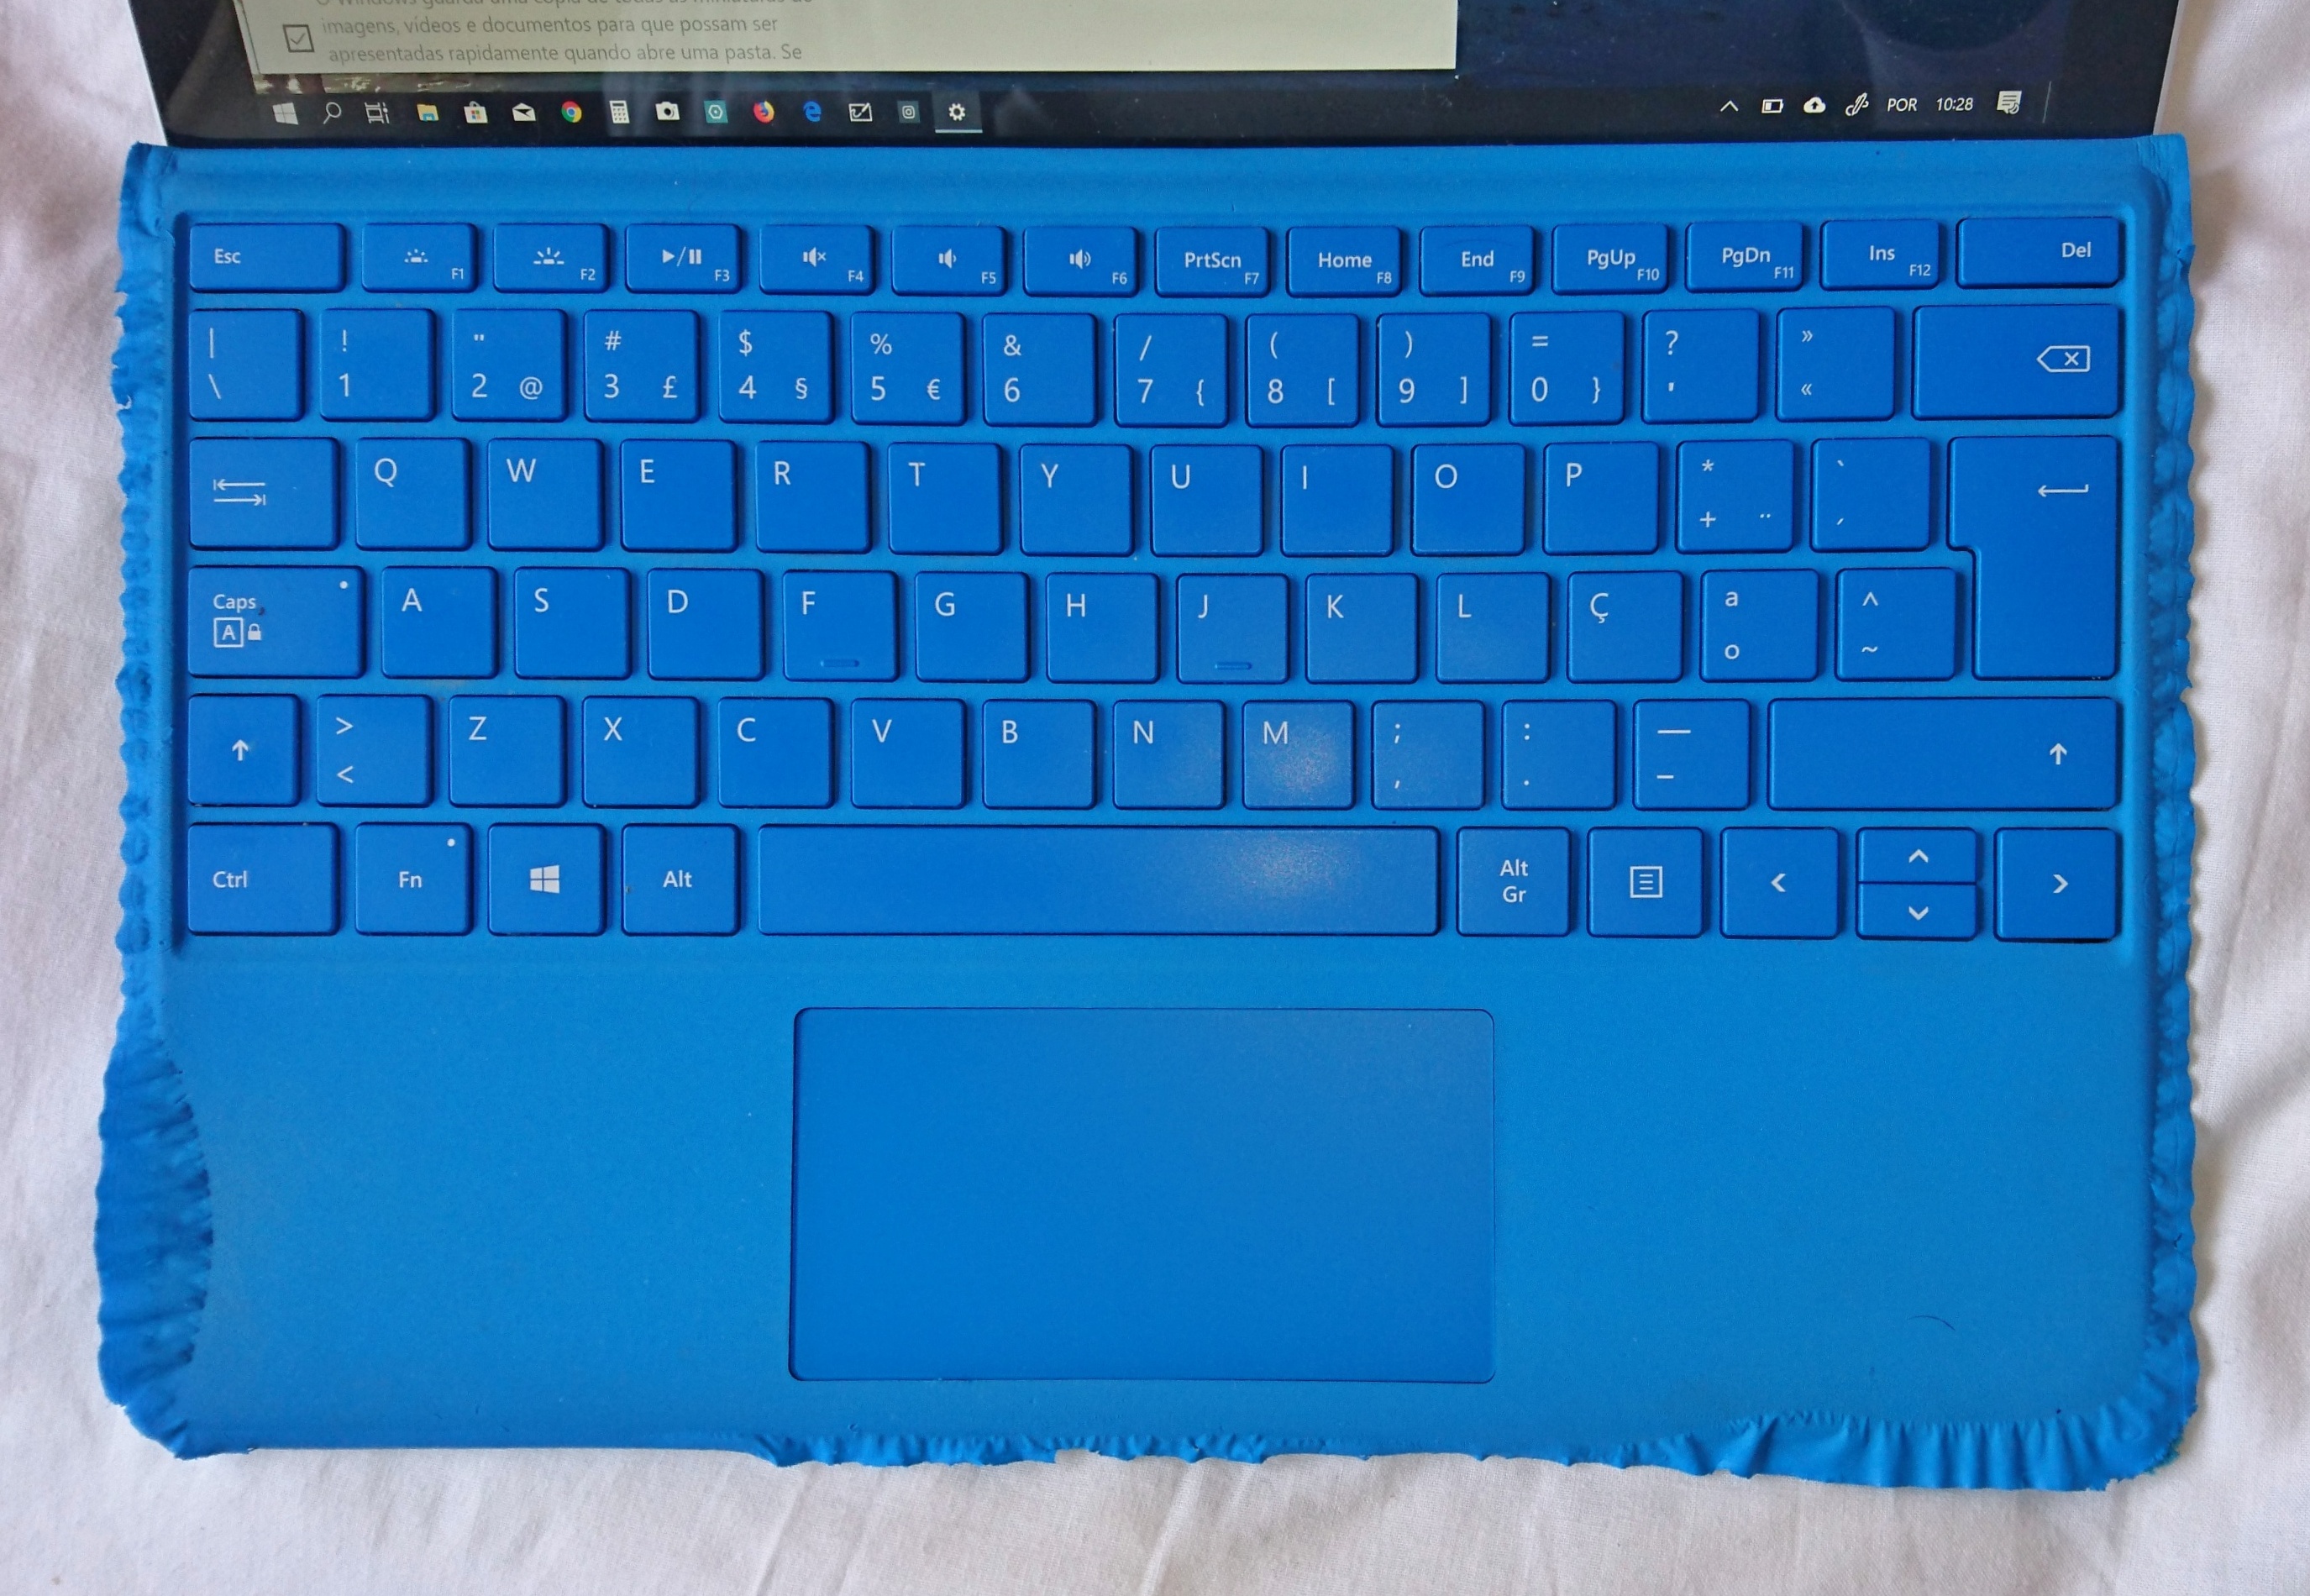 Surface pro keyboard not working after update